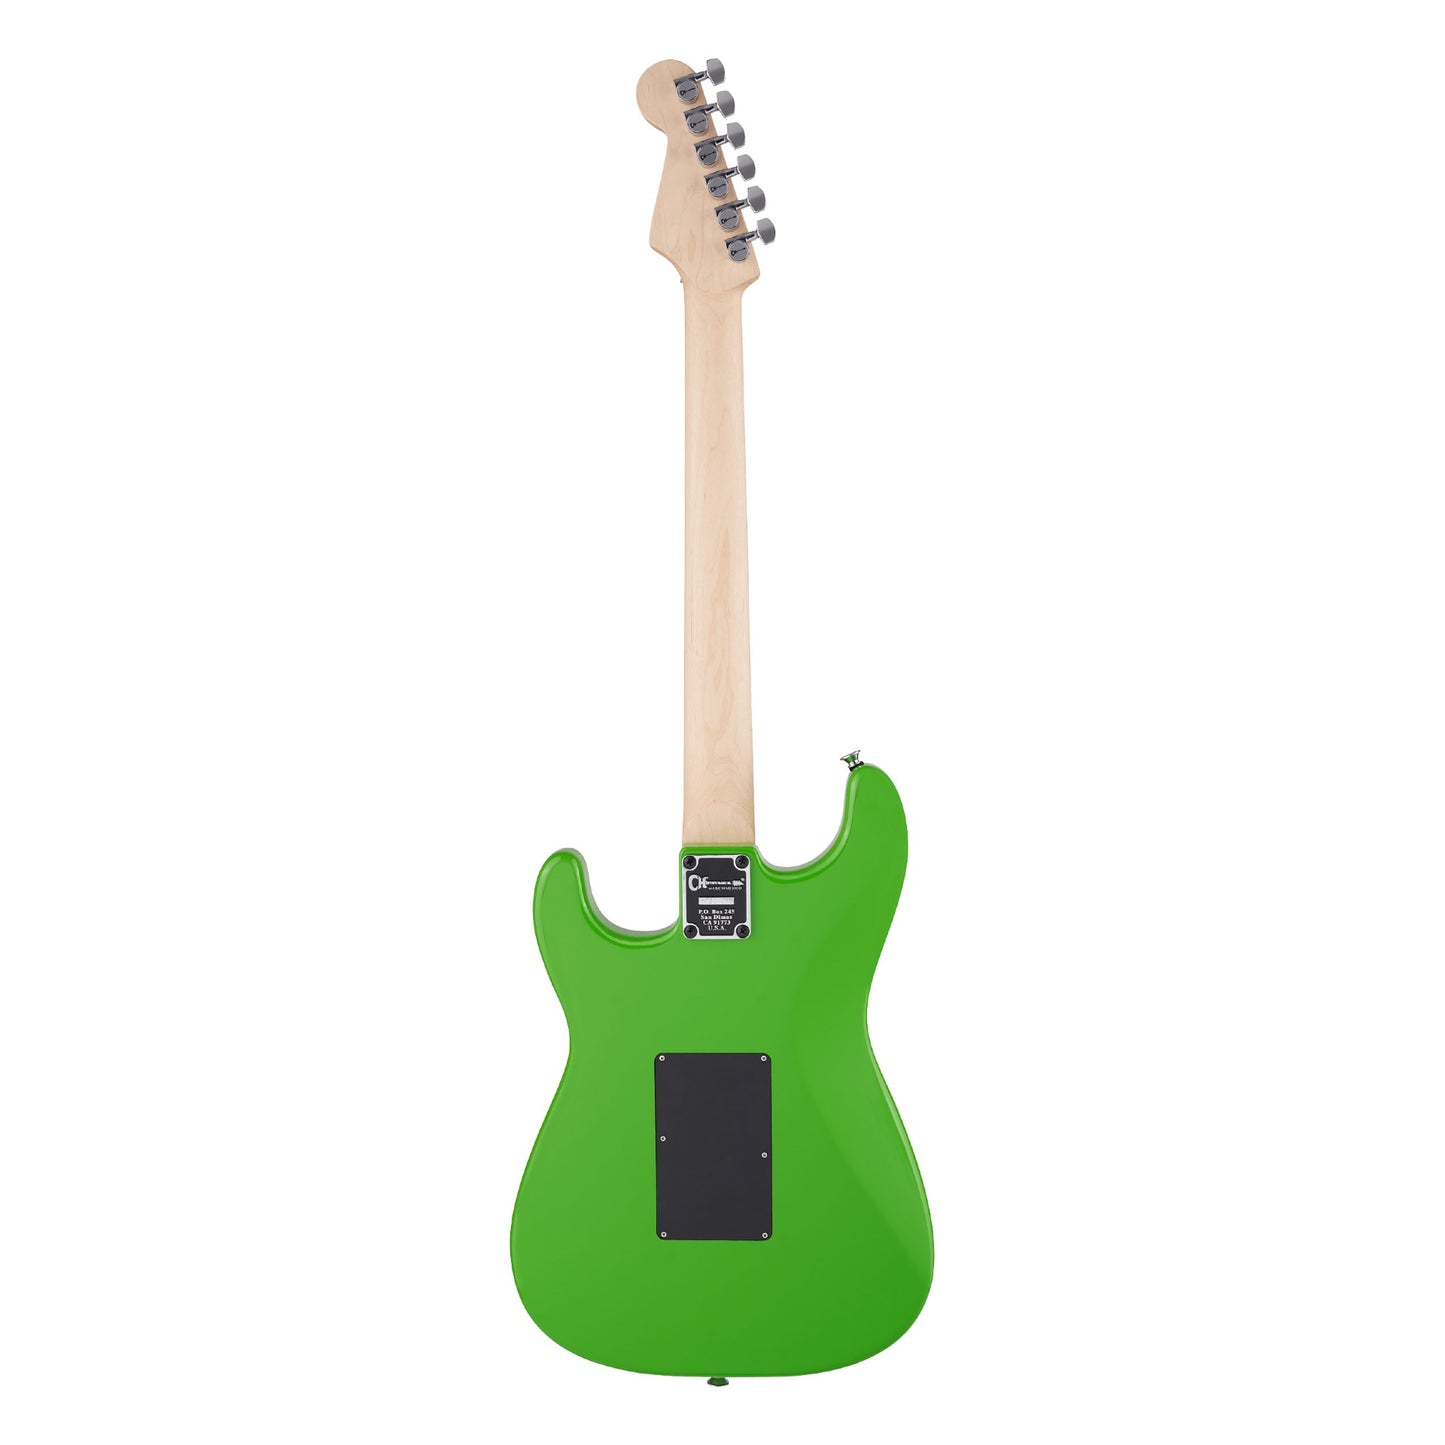 Charvel Pro-Mod So-Cal Style 1 HSH FR Electric Guitar - Slime Green 